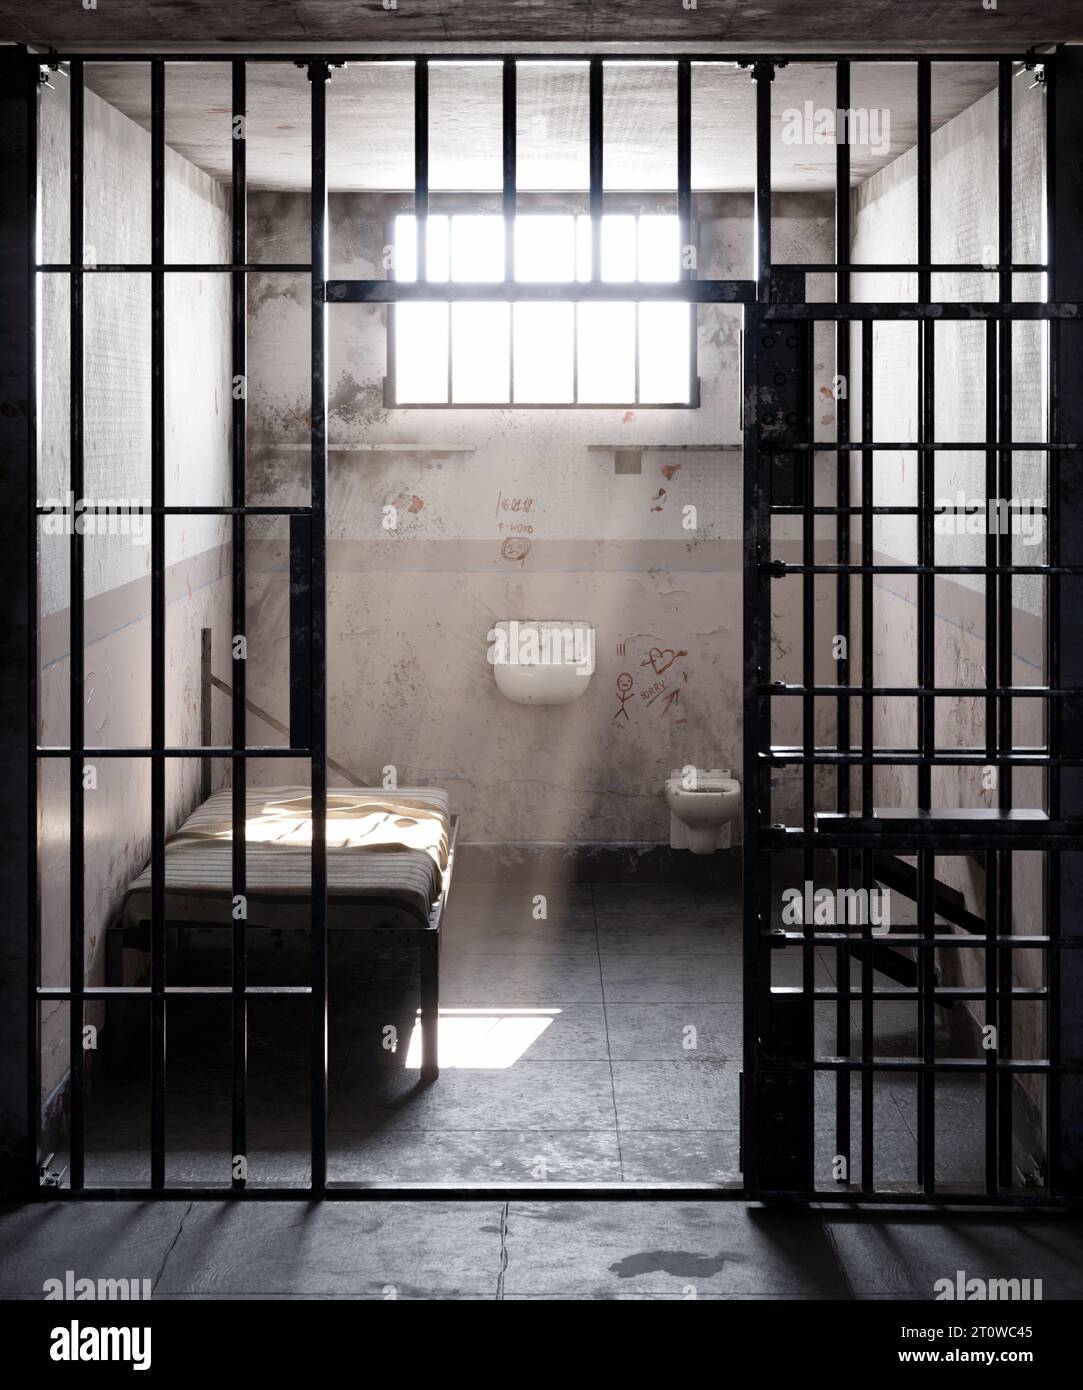 In a desolate prison cell, the rays of sunlight pour through the open window, casting a warm and radiant glow upon the bed. This image captures the ju Stock Photo